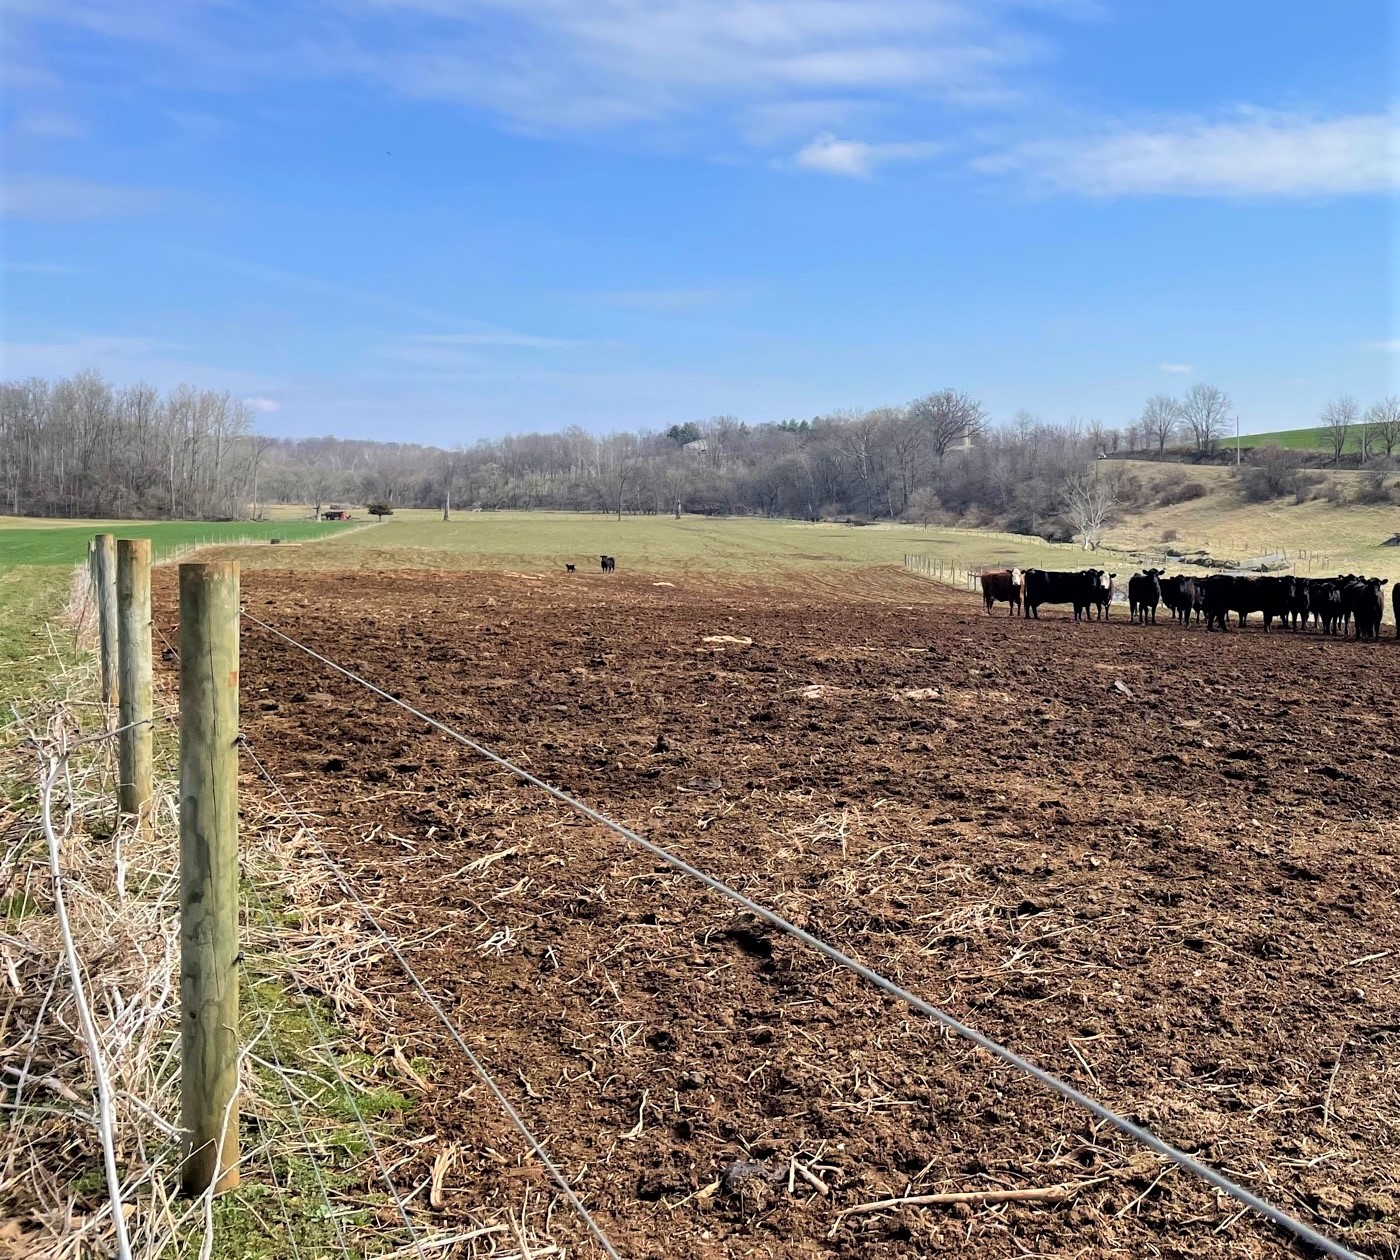 Group of black cows standing in a fenced field.